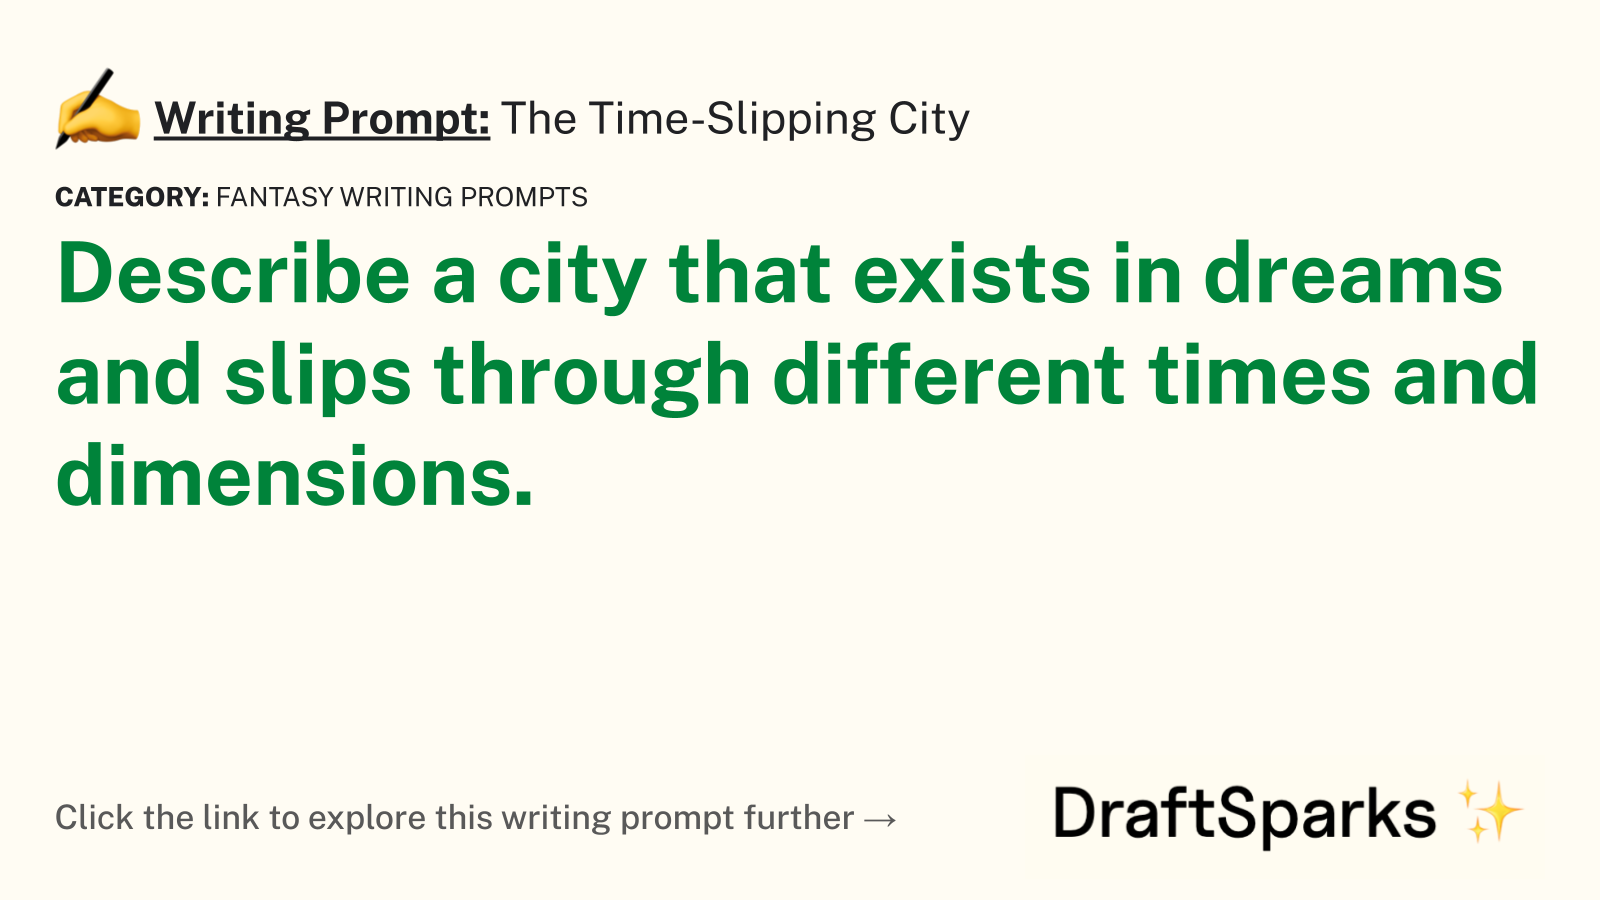 The Time-Slipping City